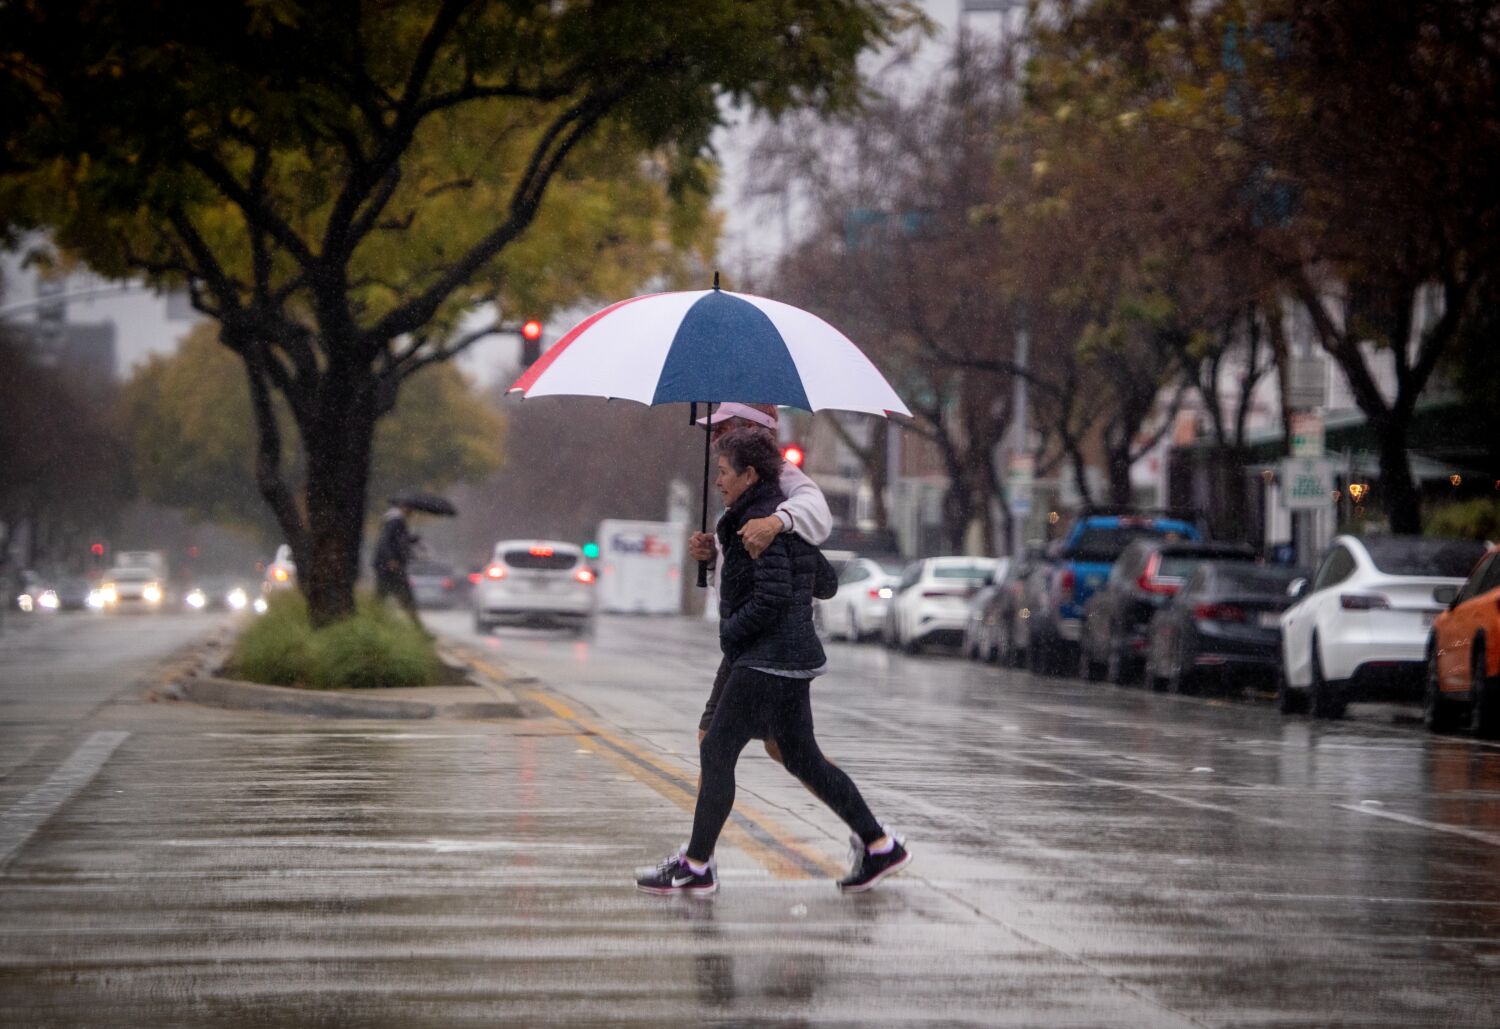 Yet more rain expected to hit California in March. But warmer storms could cause problems